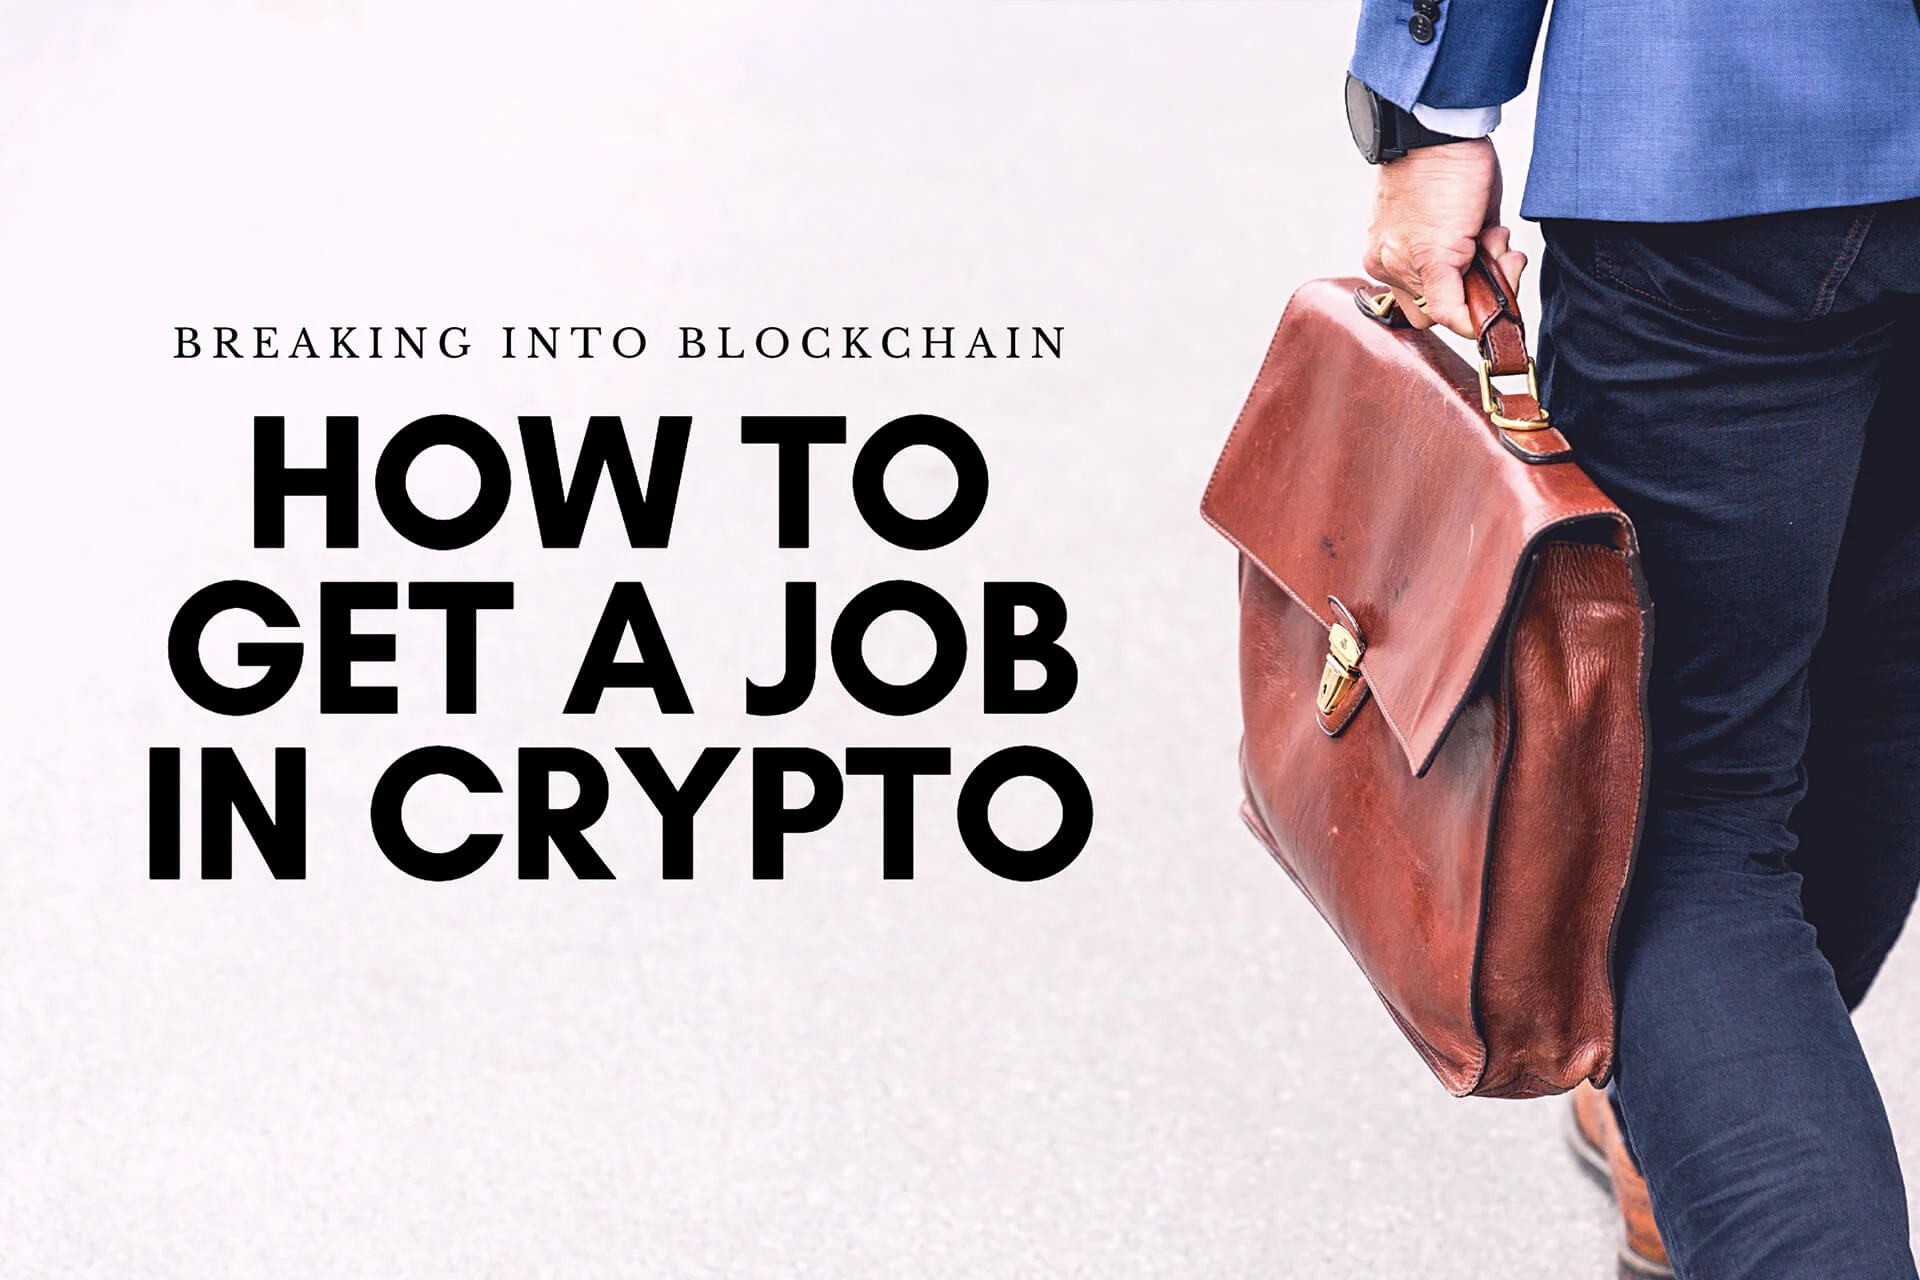 Image: Breaking into Blockchain: How to Get a Job in Crypto